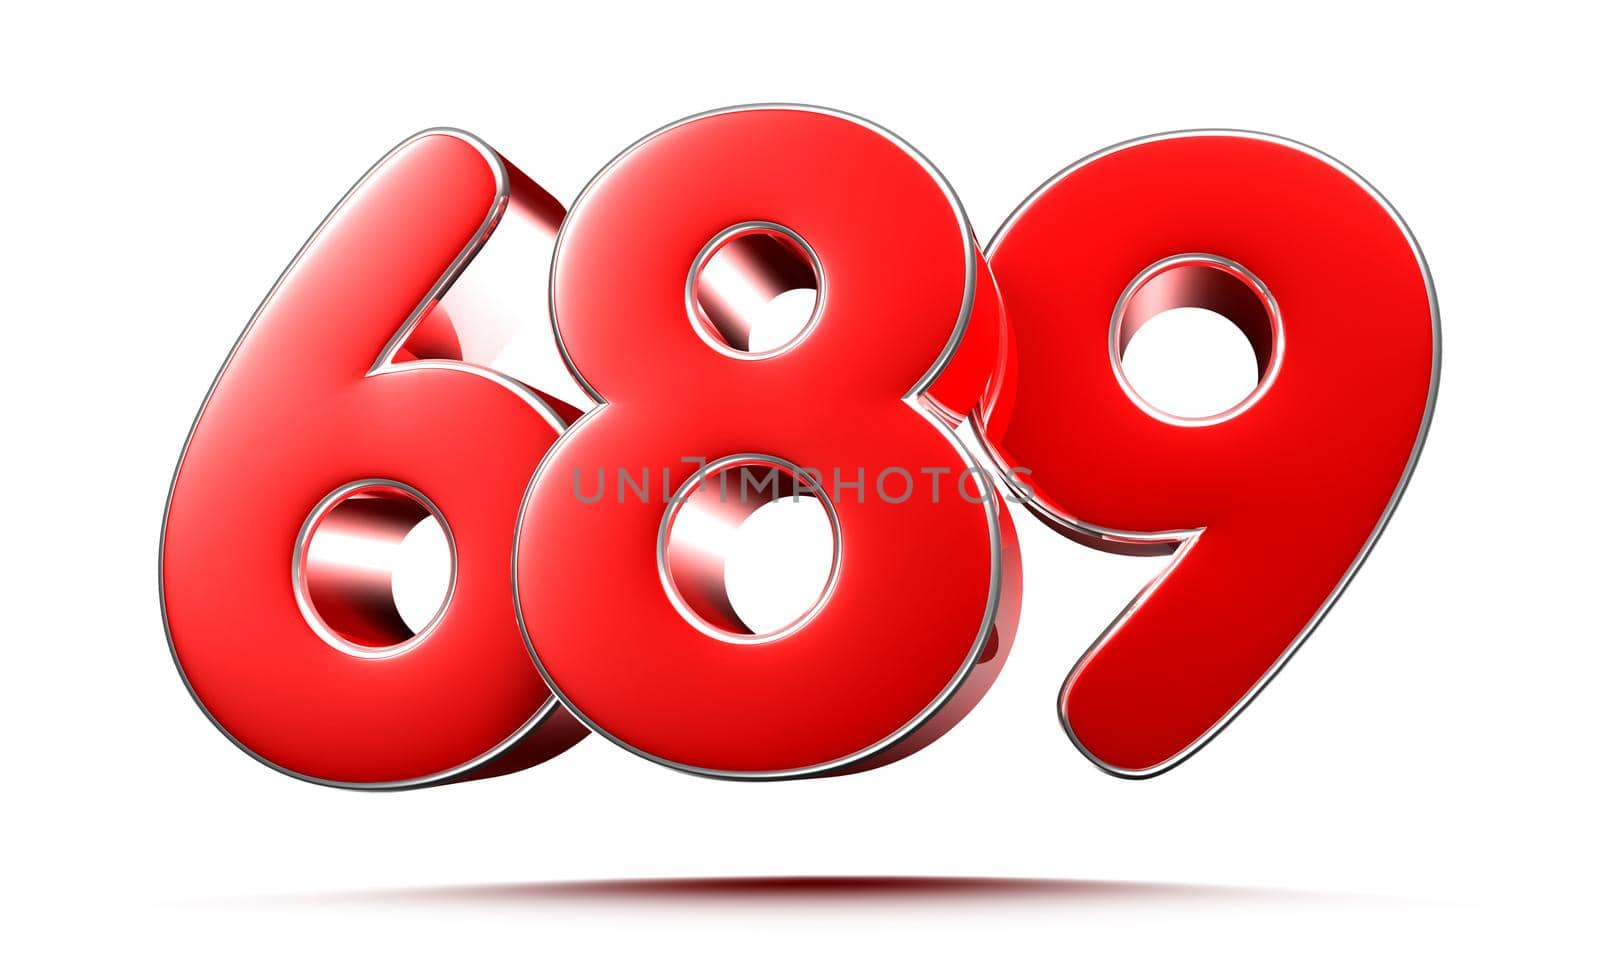 Rounded red numbers 689 on white background 3D illustration with clipping path